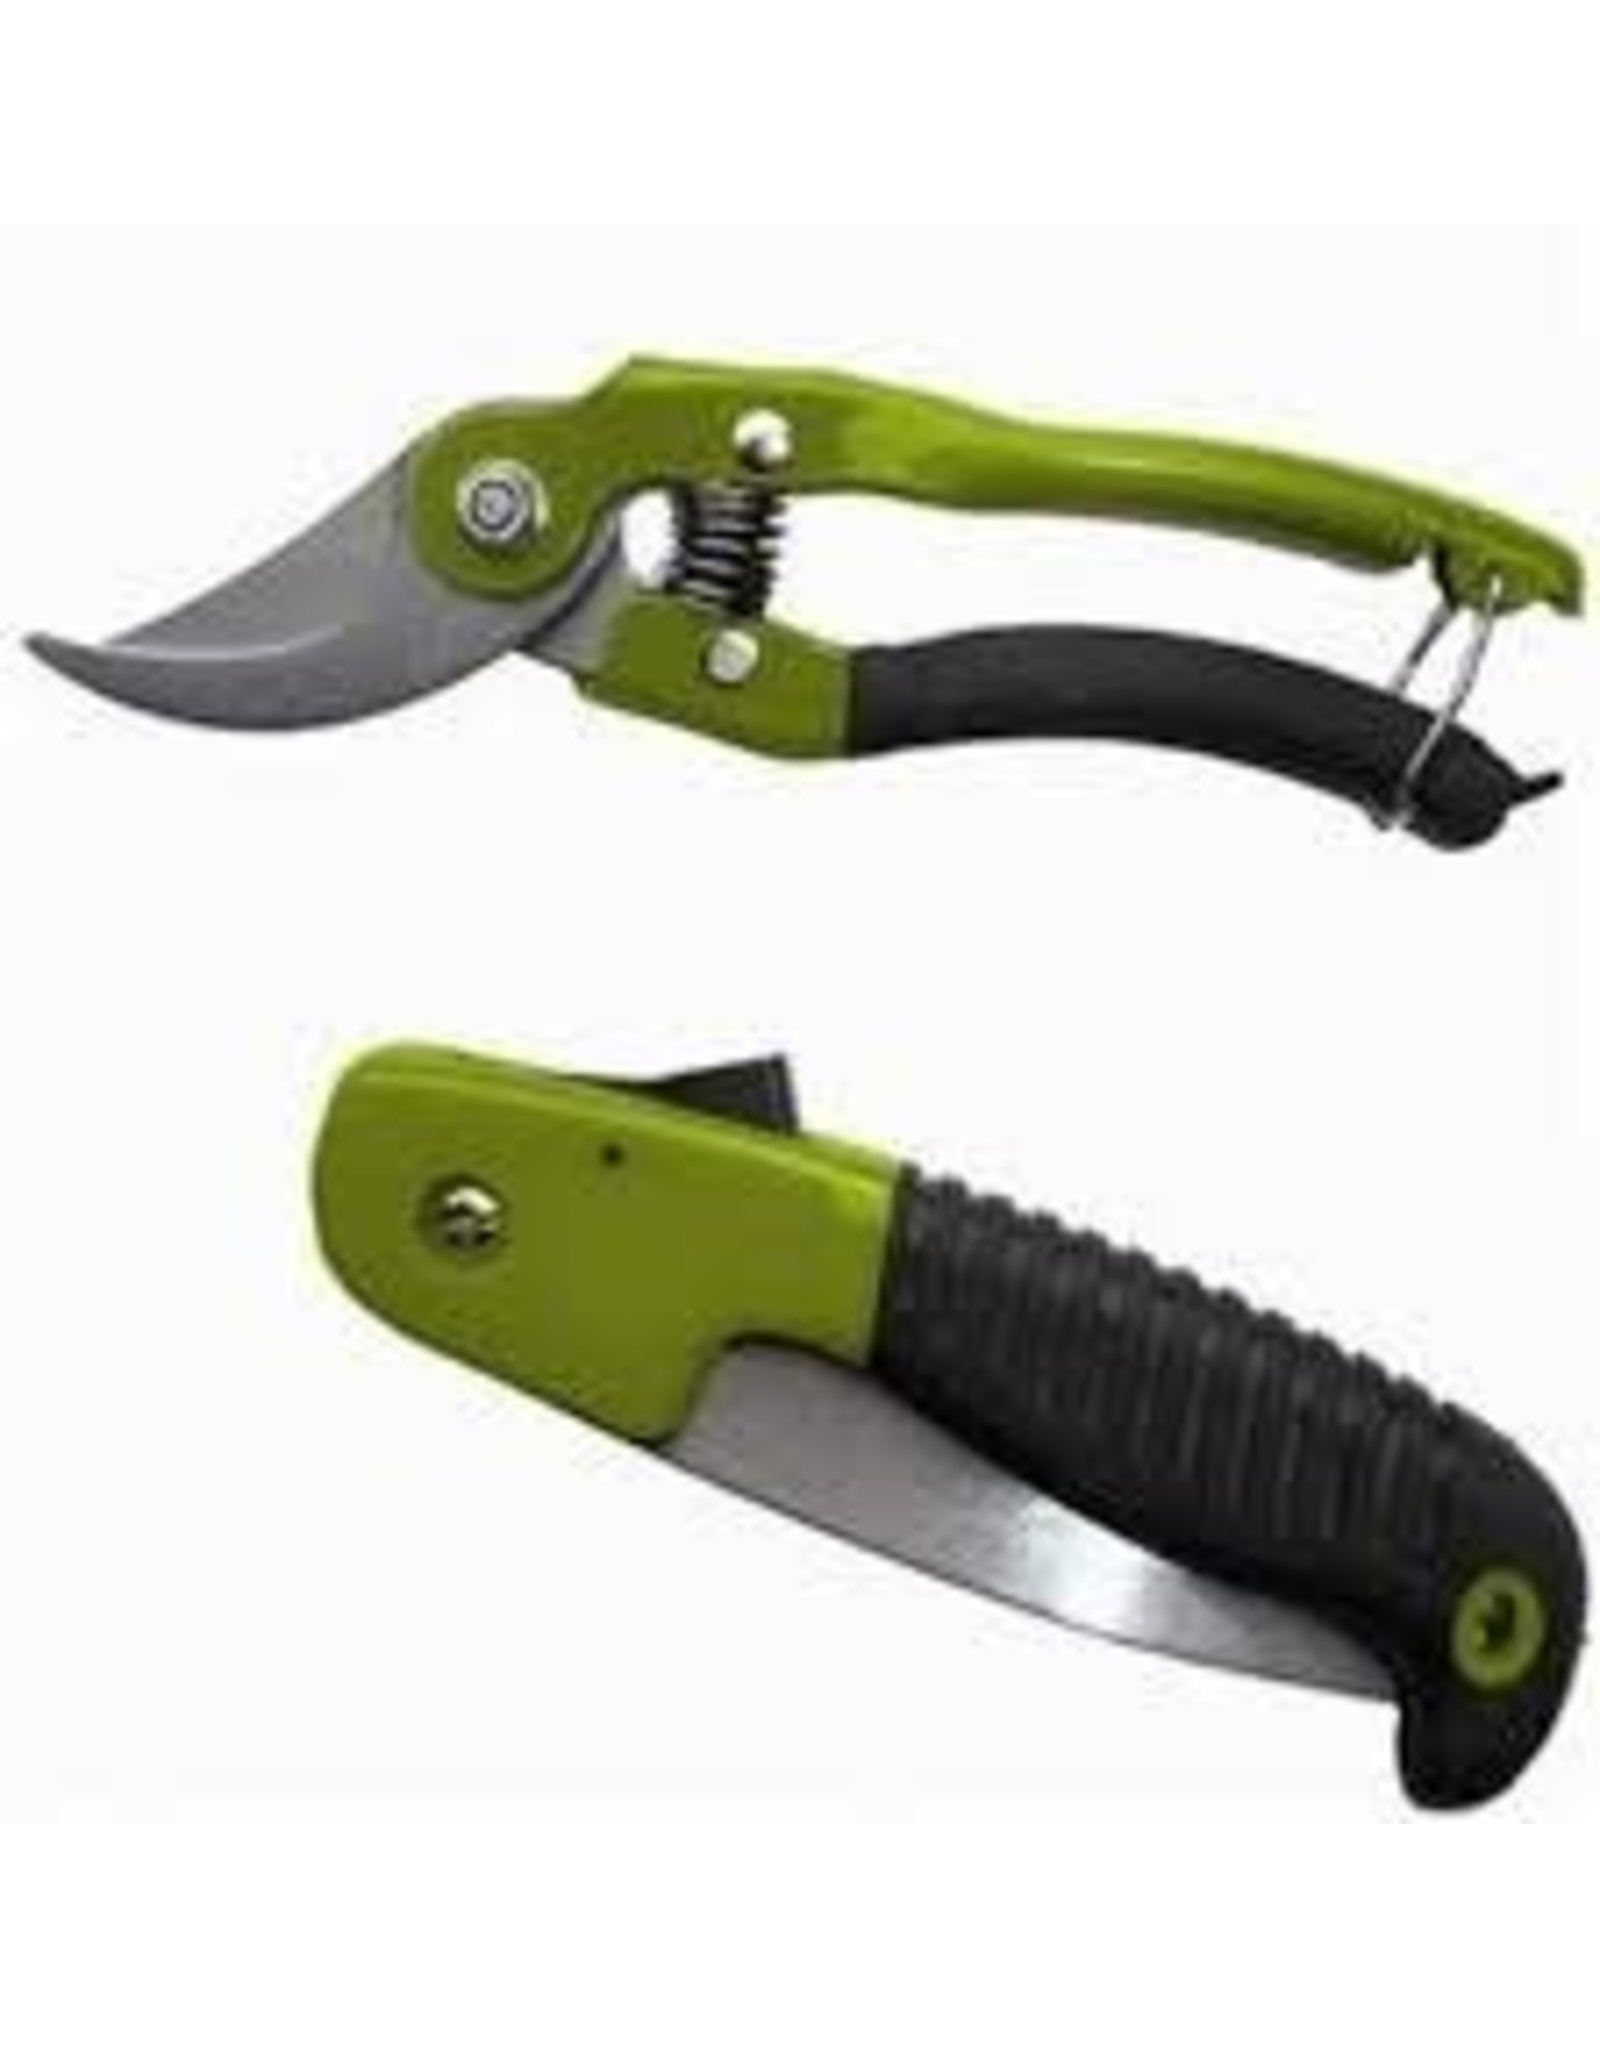 HME Products HME HCP-1 Hunter's Combo Pack Shears & 5'' Folding Saw